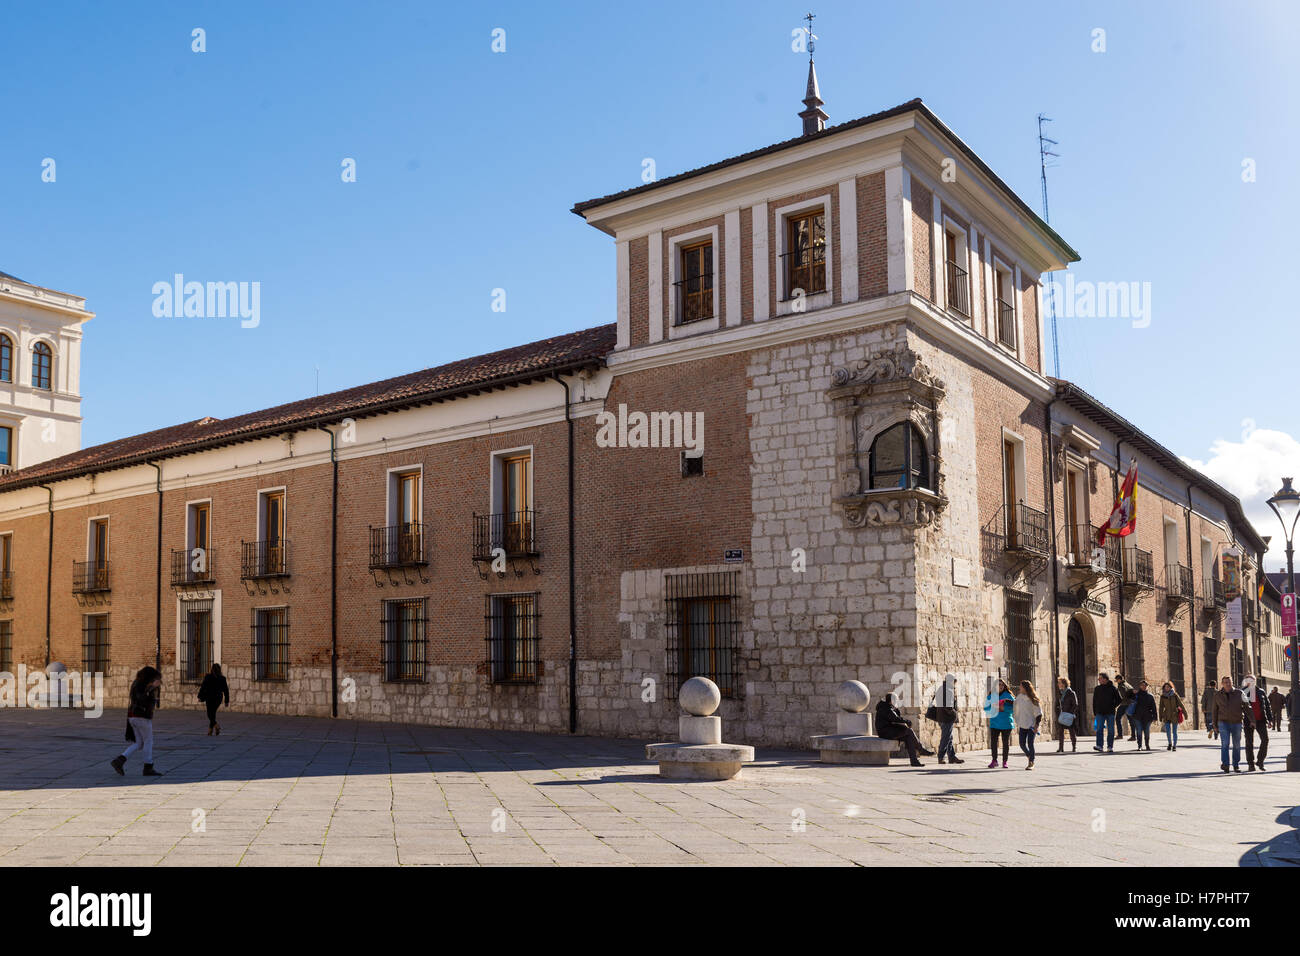 VALLADOLID, SPAIN - NOVEMBER 7, 2016: Valladolid Pimentel Palace. Birthplace of King Philip II. Example of palatial architecture Stock Photo